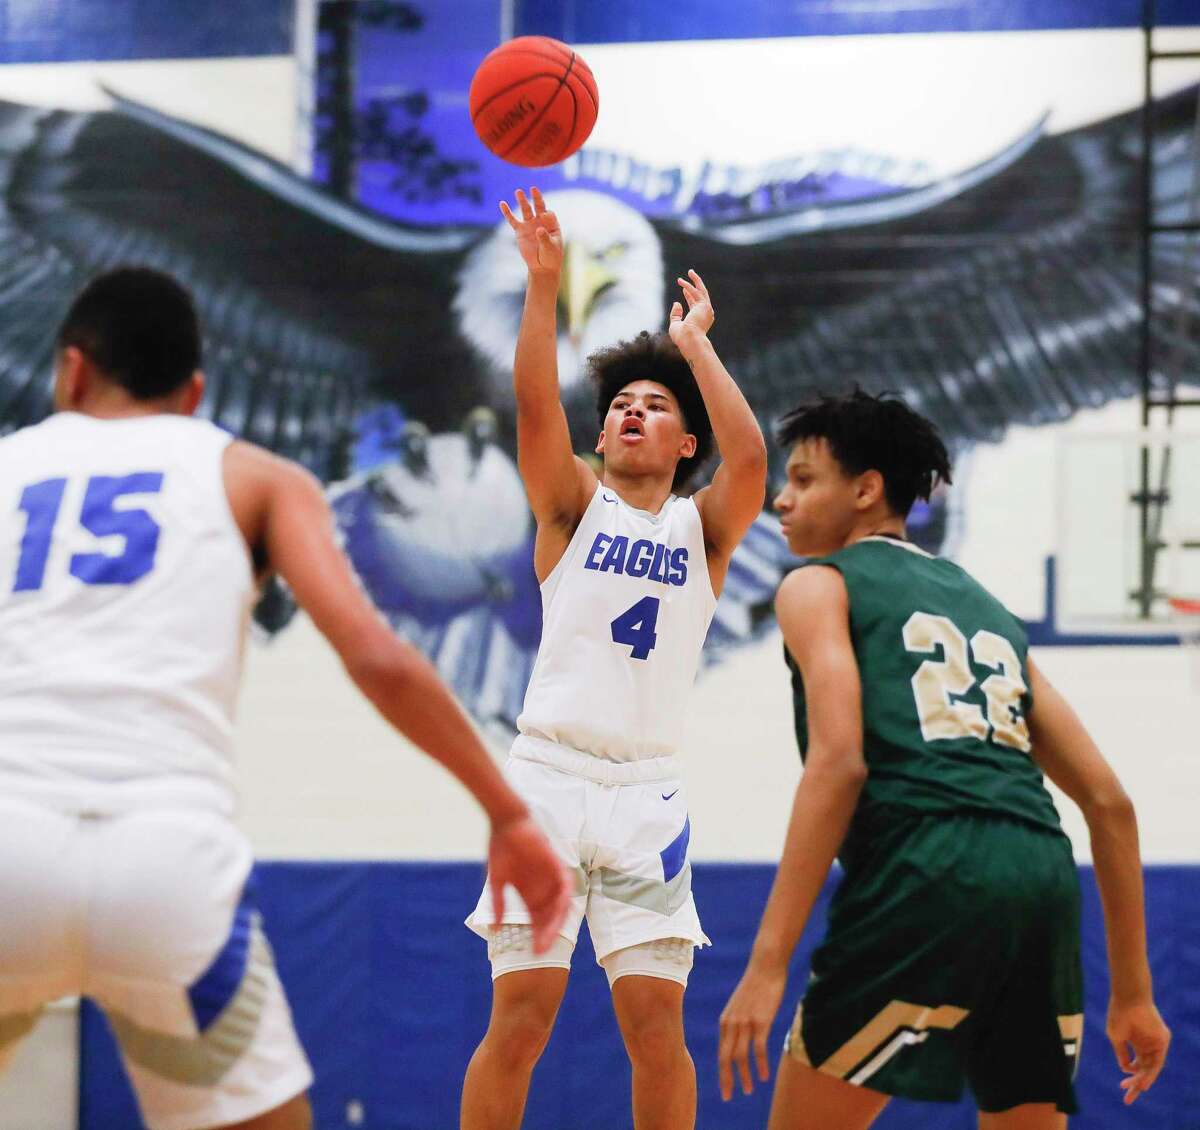 New Caney point guard Dylan Dempsey (4) shoots a three-pointer during a high school basketball game at New Caney High School, Tuesday, Dec. 28, 2021, in New Caney/